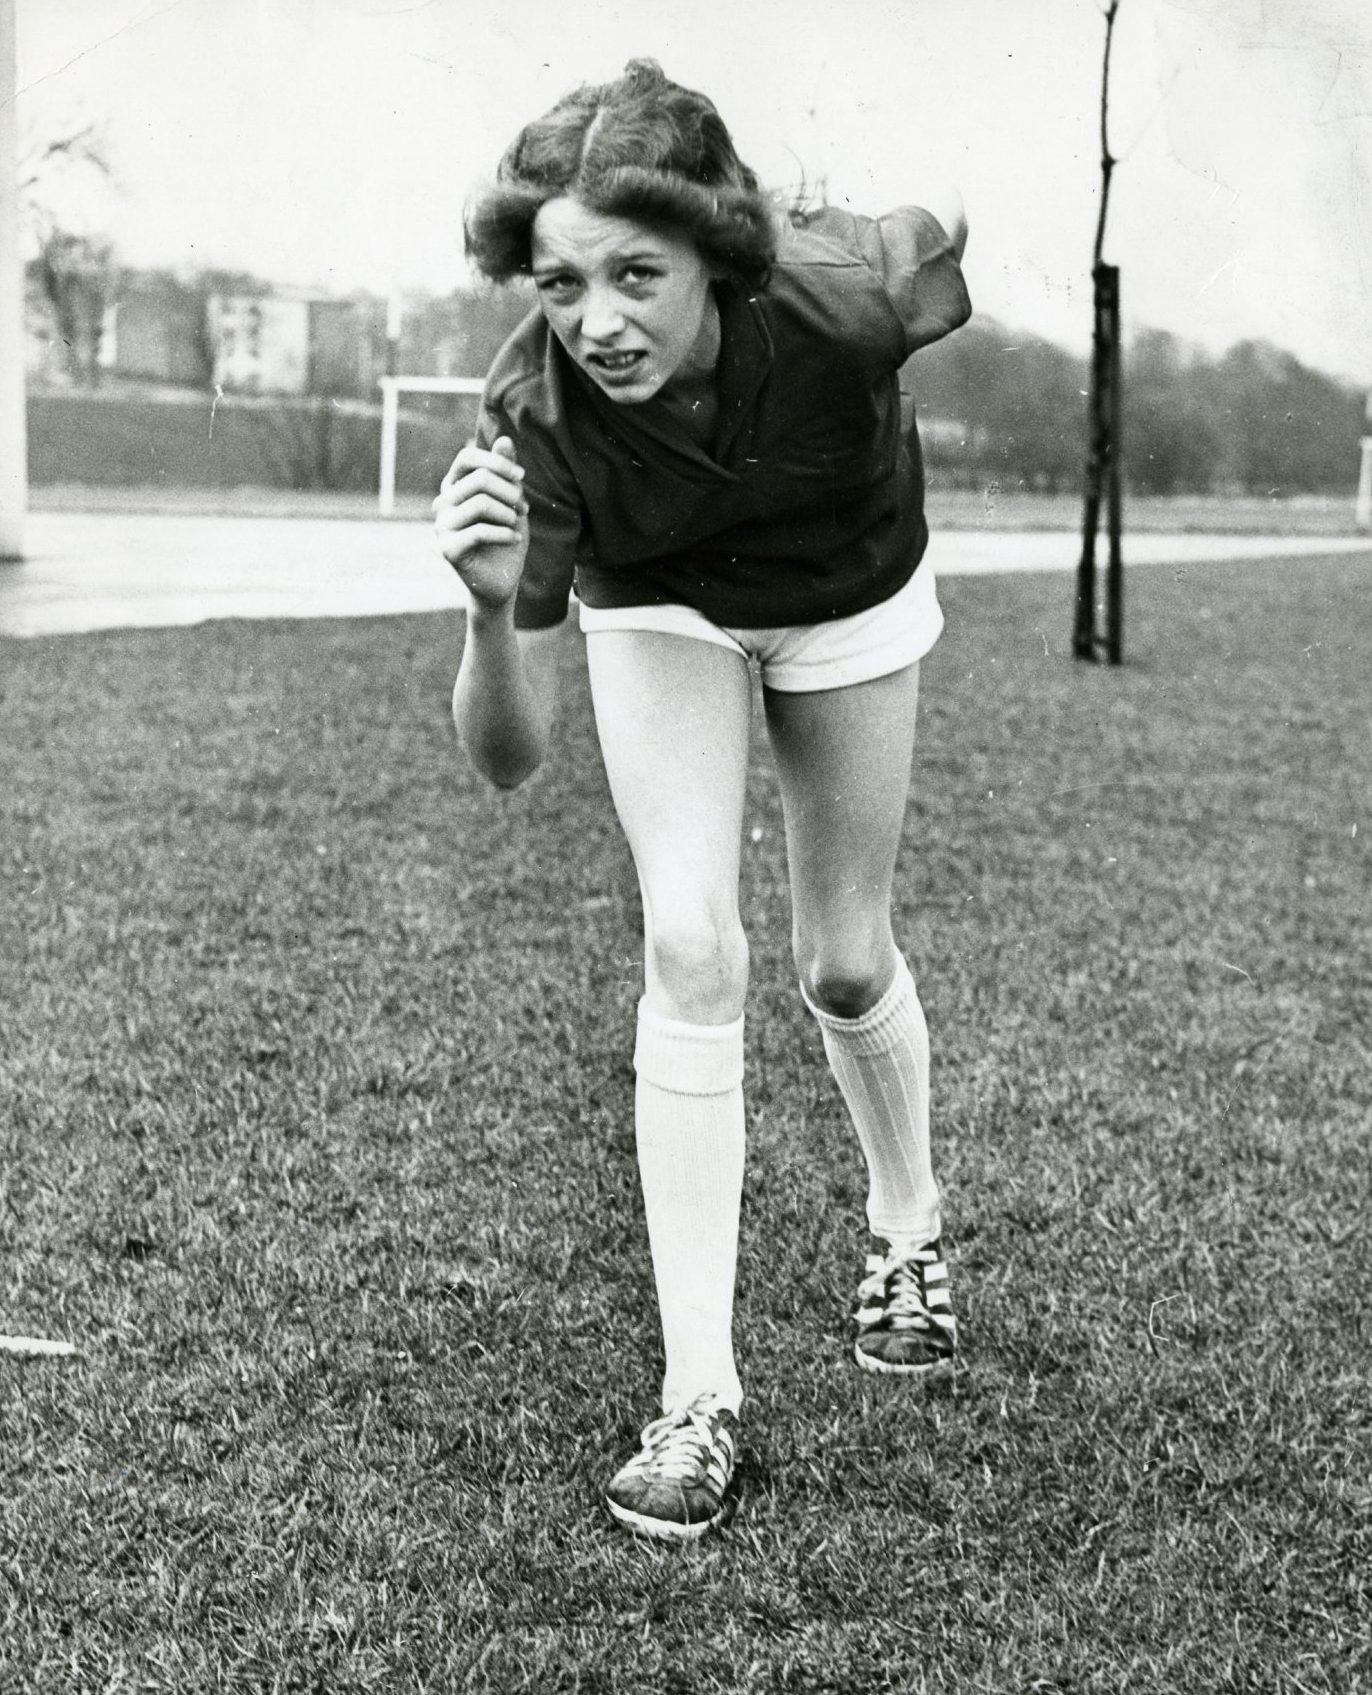 Liz showing off her running style in 1978.